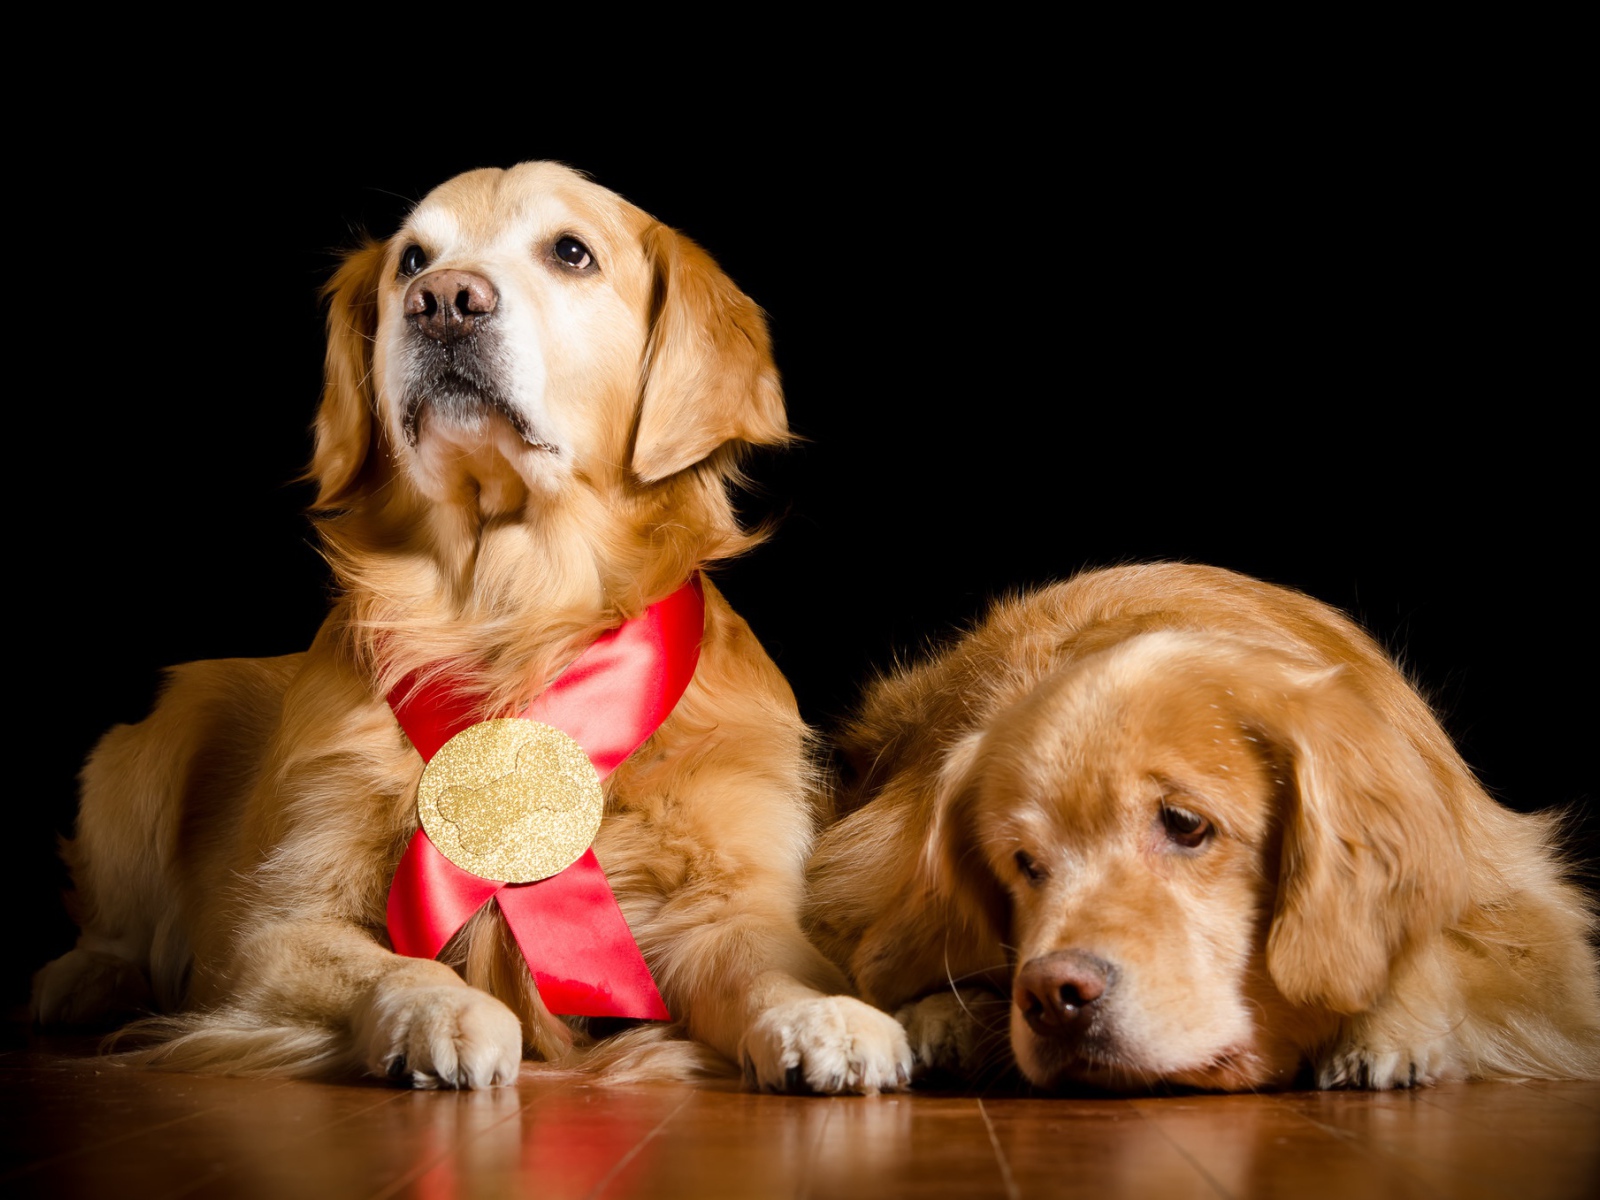 Two golden retriever on the floor on a black background